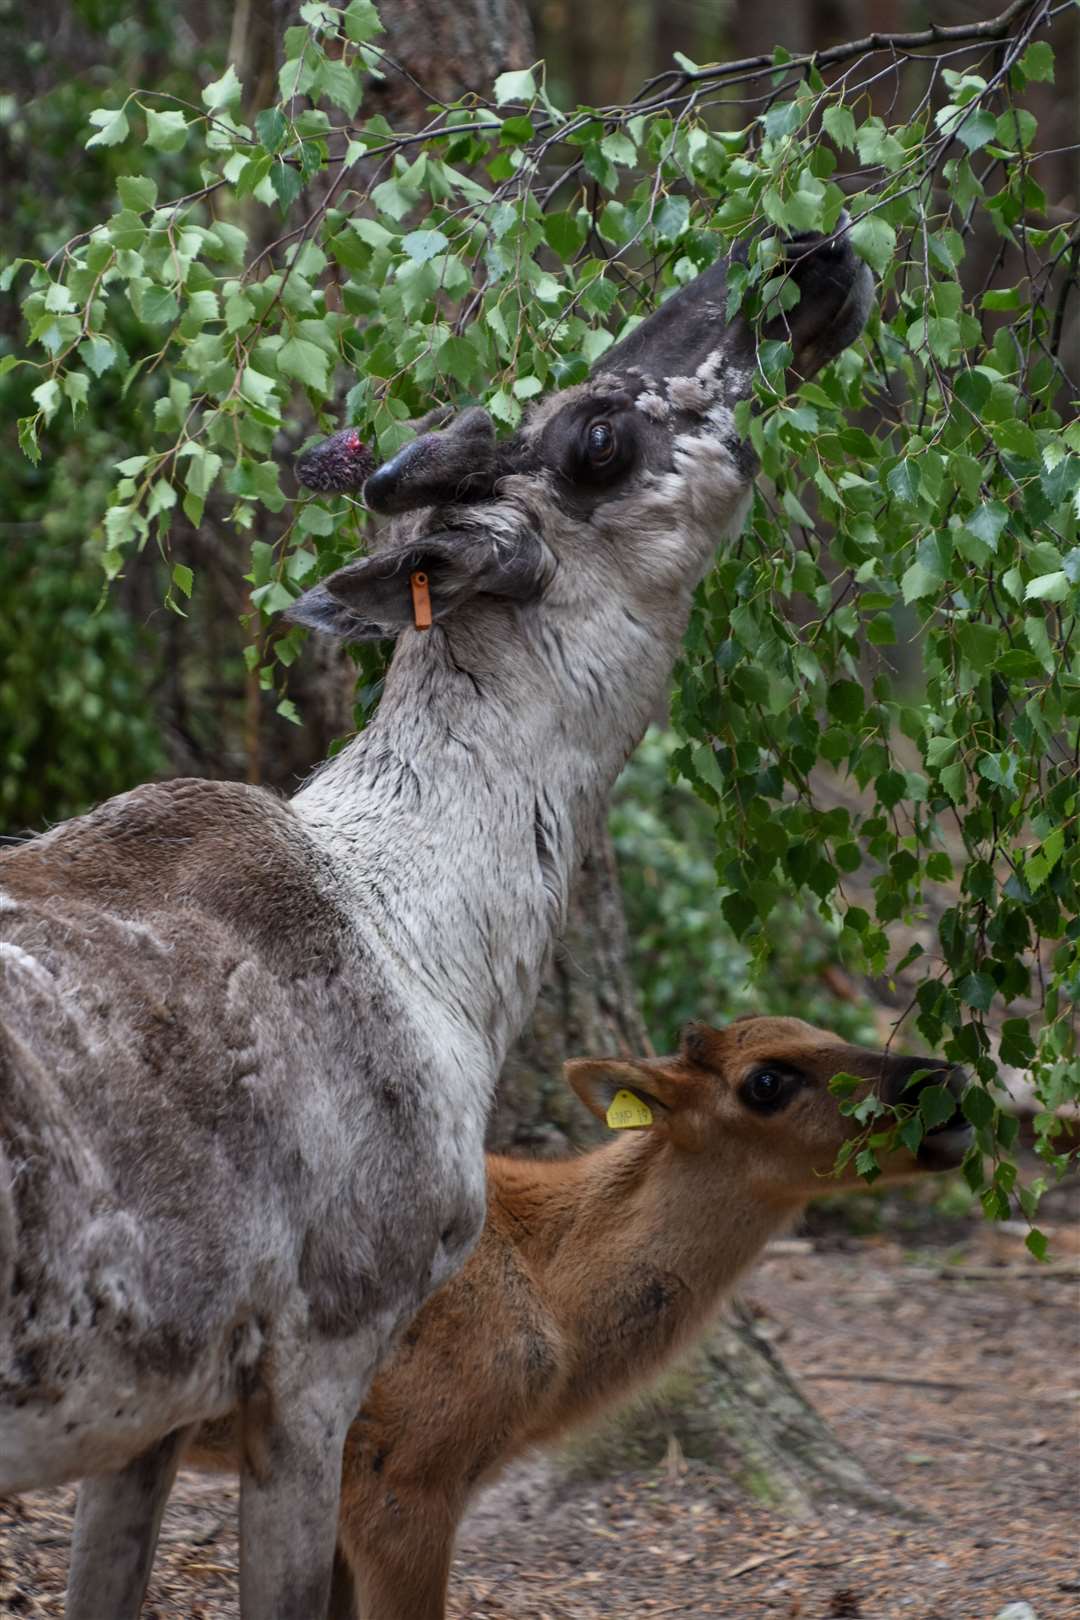 The reindeer calves have been named by staff.